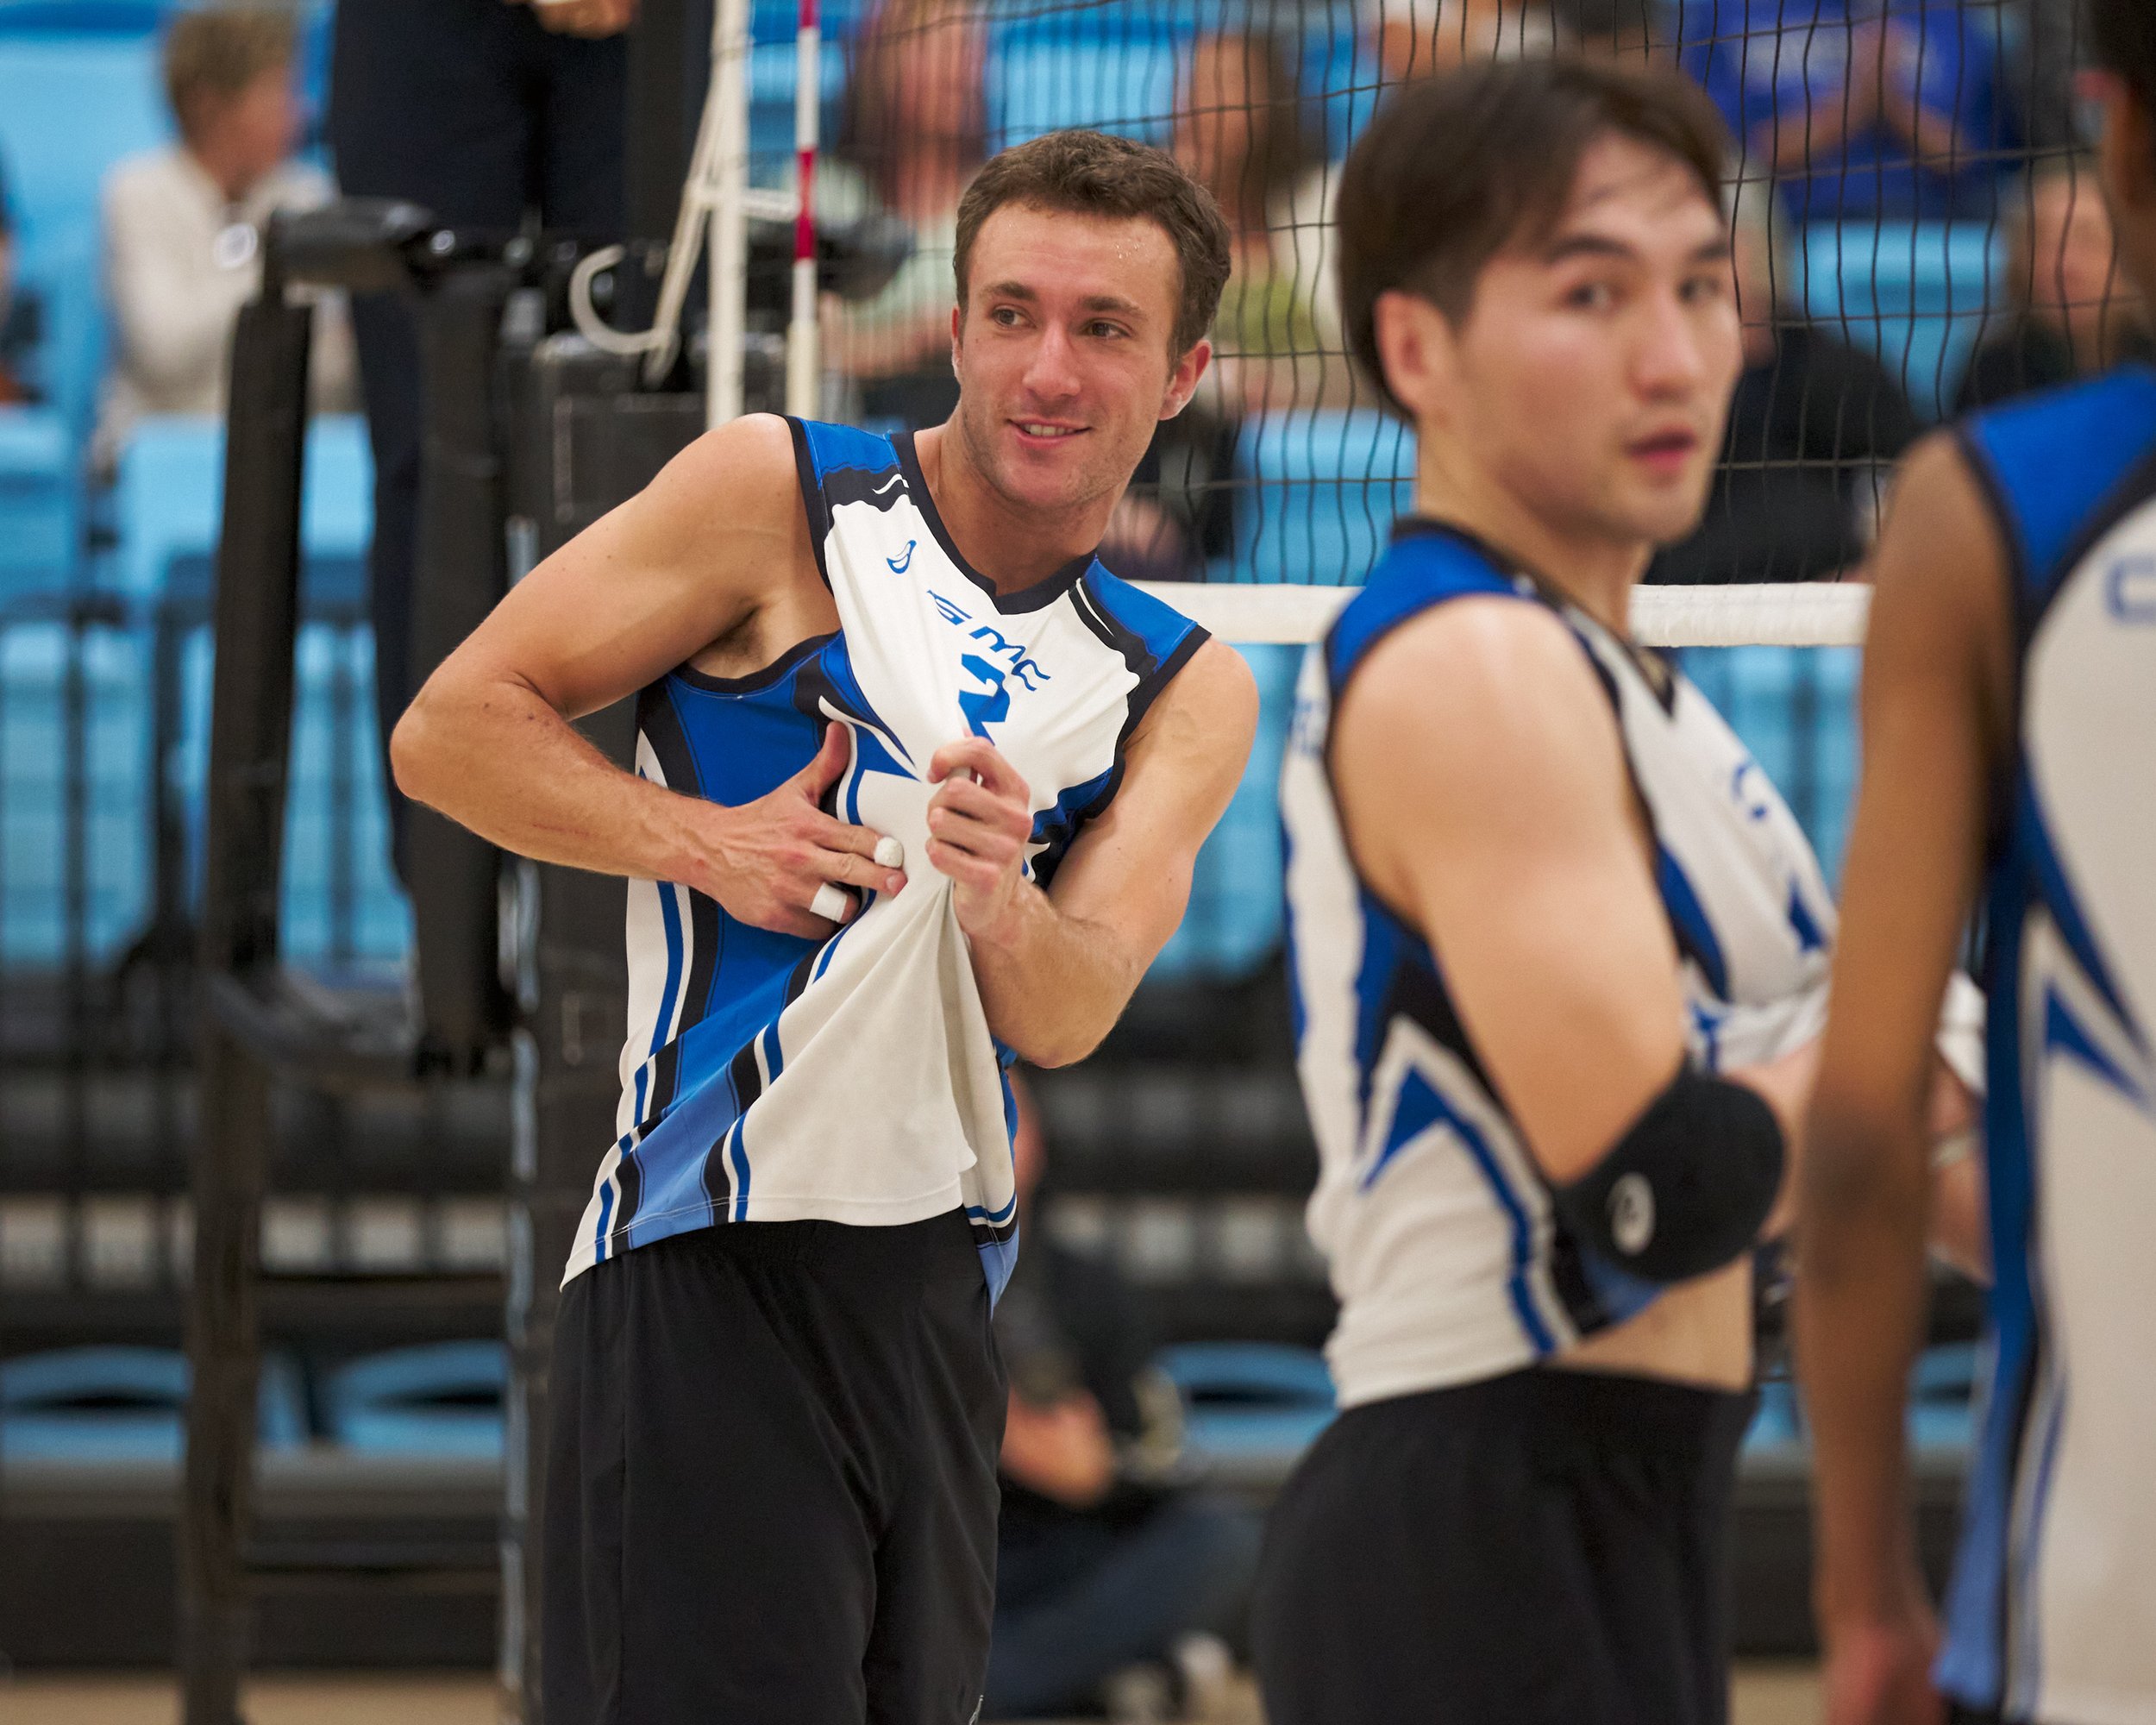  Santa Monica College Corsairs' Kane Schwengel signals, with Enkhtur Tserendavaa on the right, during the men's volleyball match against the Moorpark College Raiders on Friday, March 17, 2023, at Moorpark College's Gymnasium in Moorpark, Calif. The C